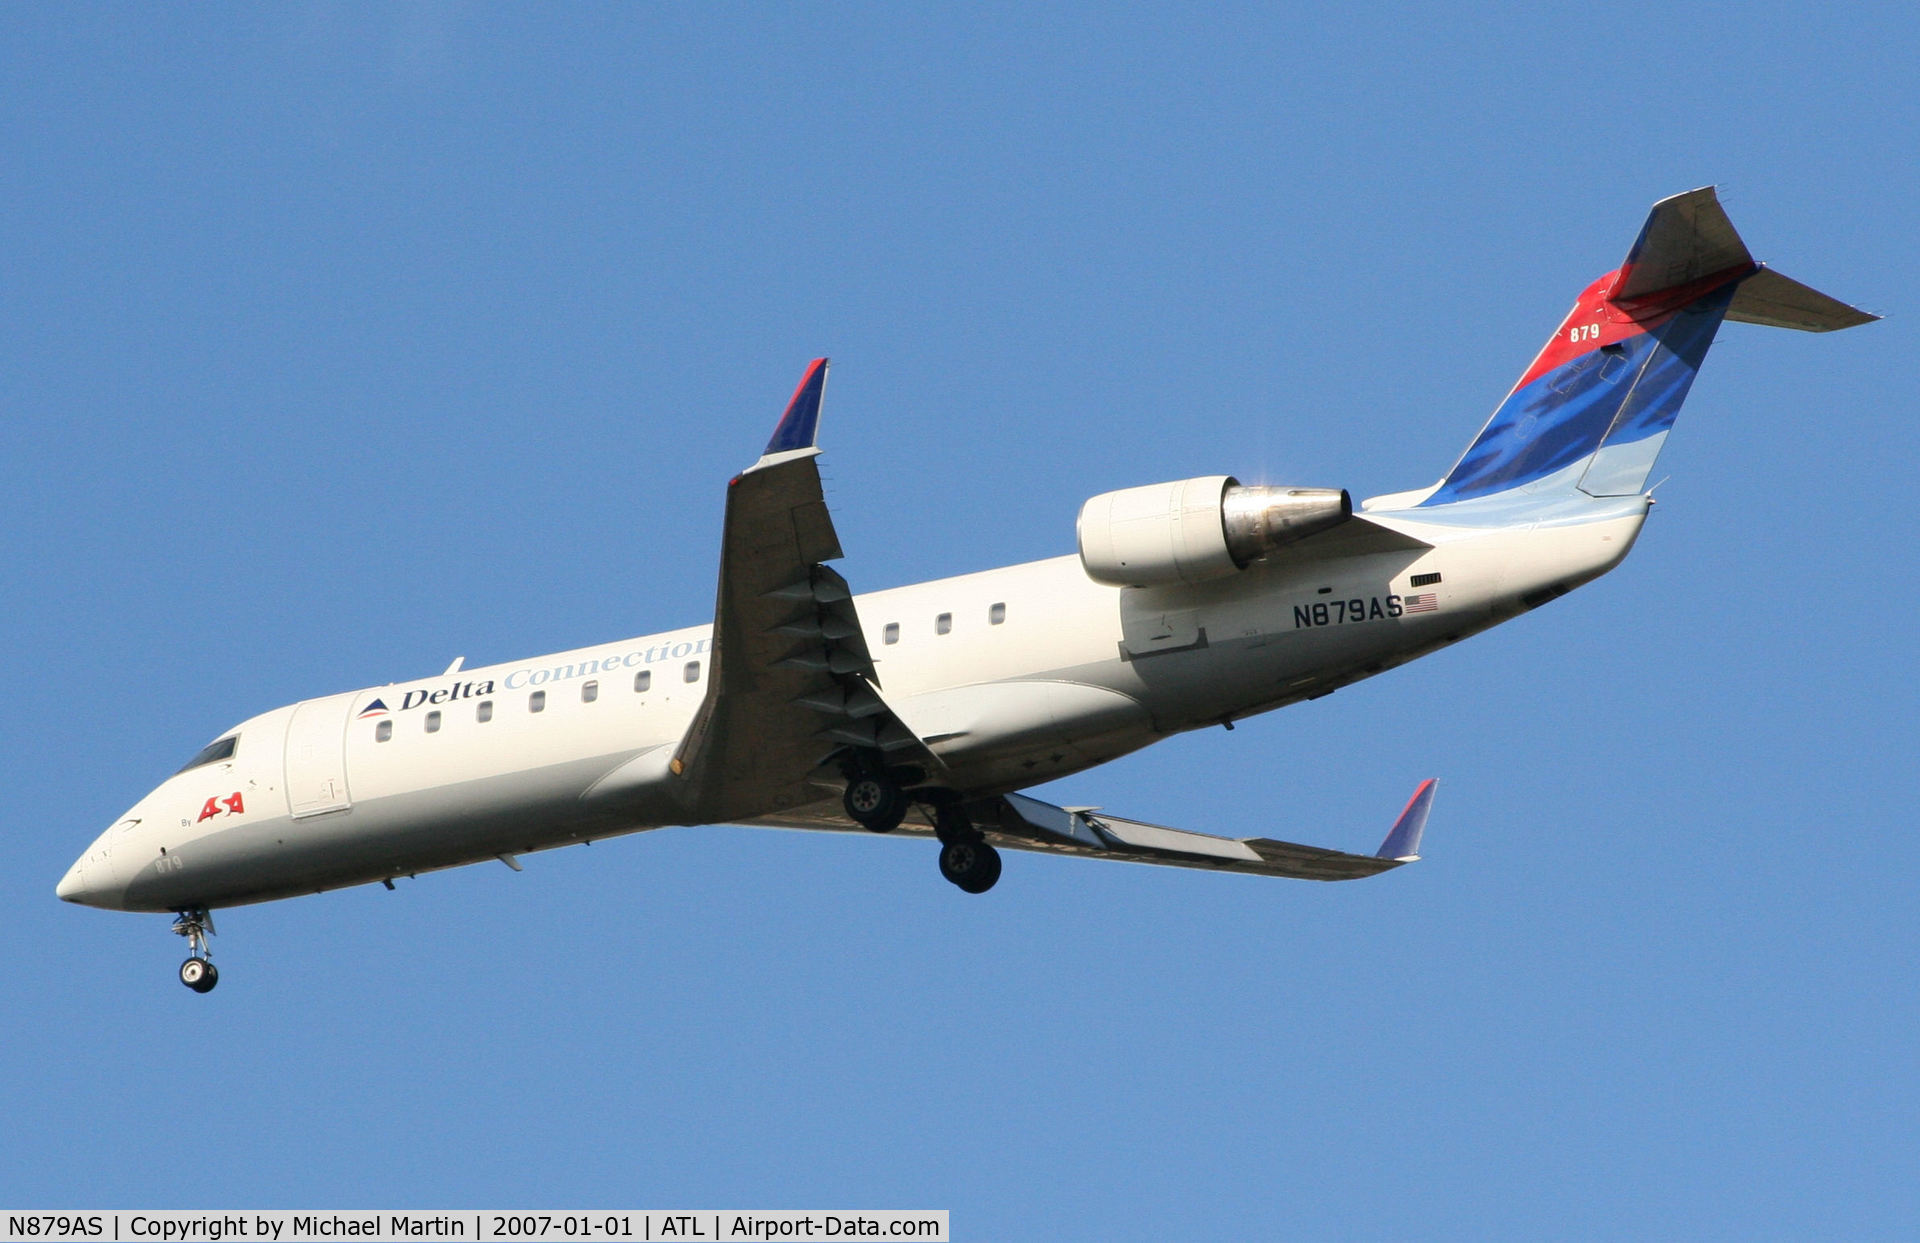 N879AS, 2002 Bombardier CRJ-200ER (CL-600-2B19) C/N 7600, Over the numbers of 26L